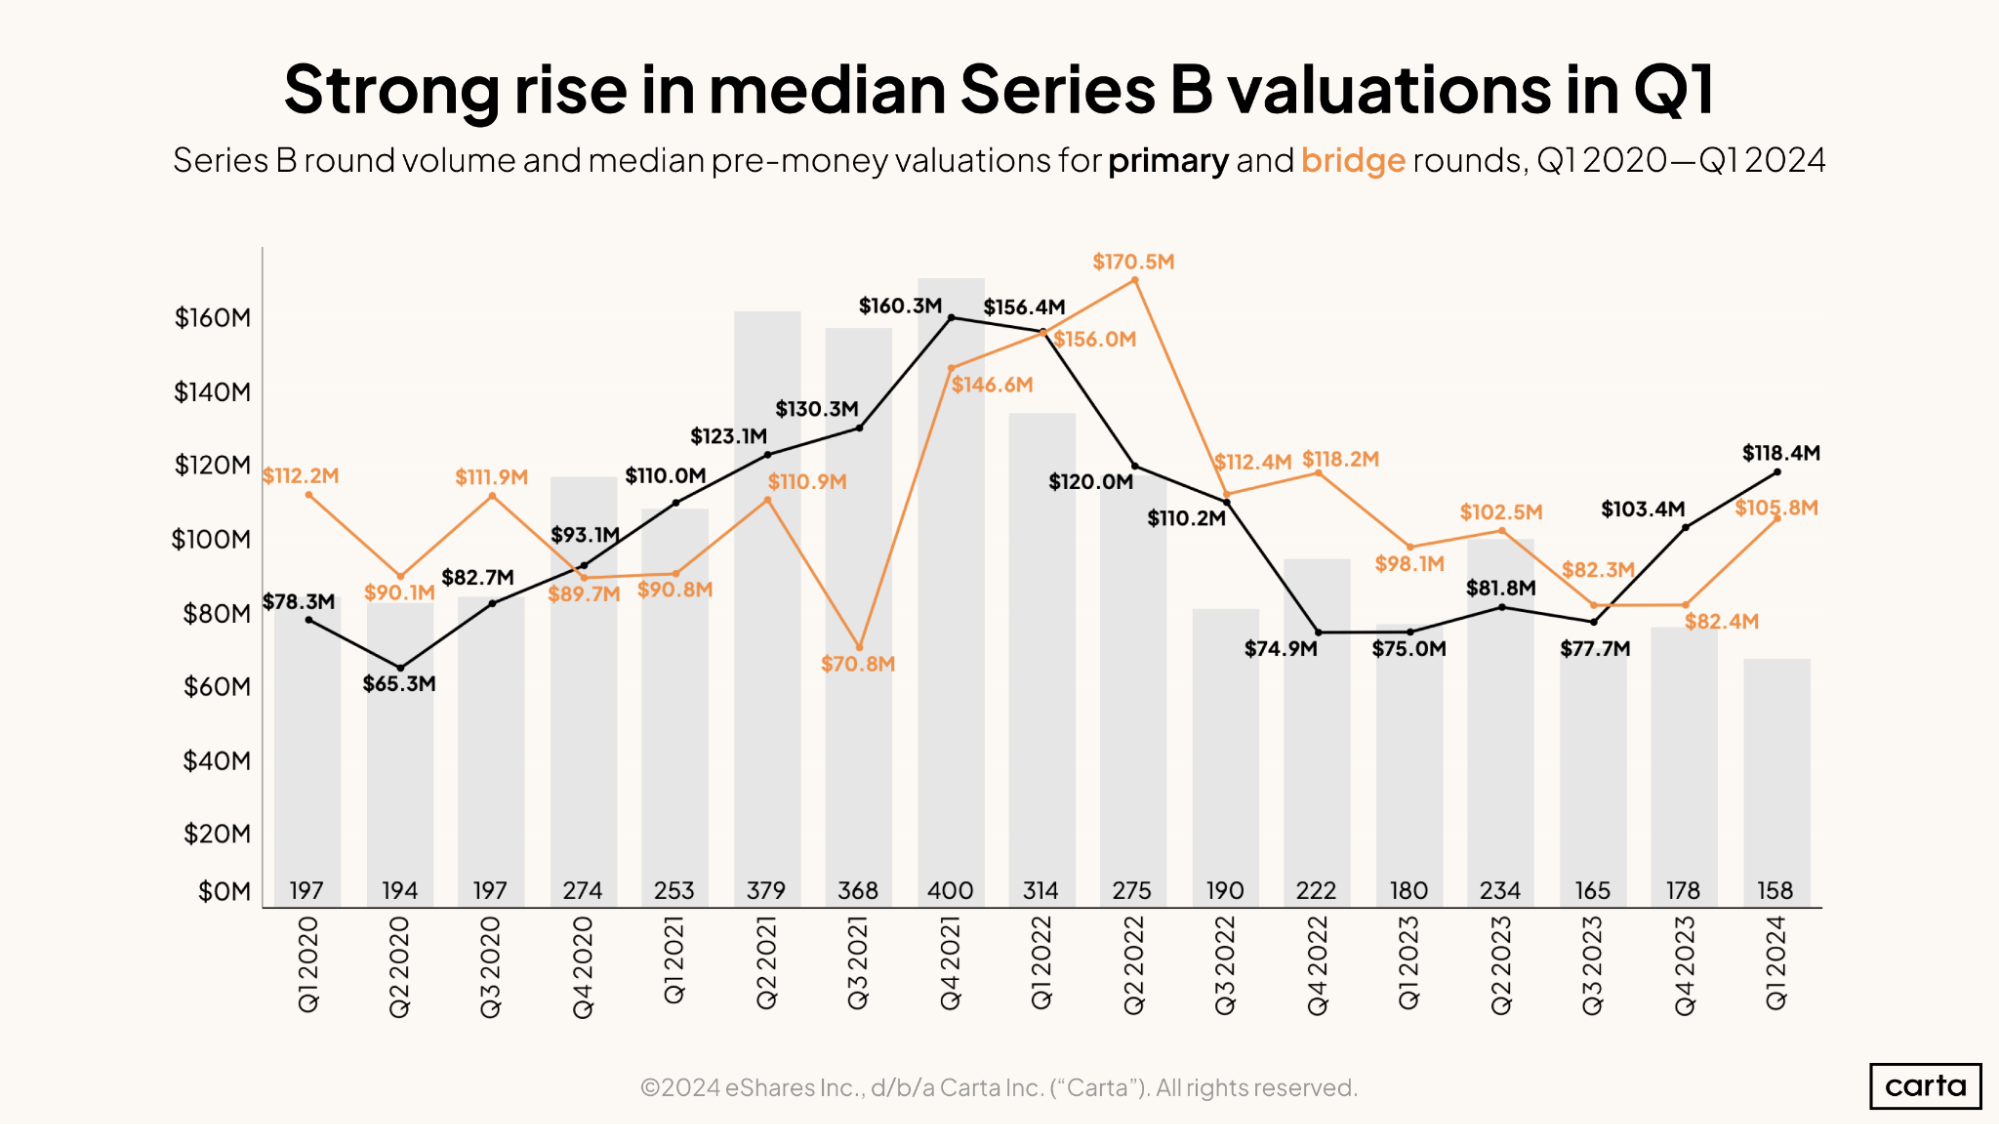 Strong rise in median Series B valuations in Q1